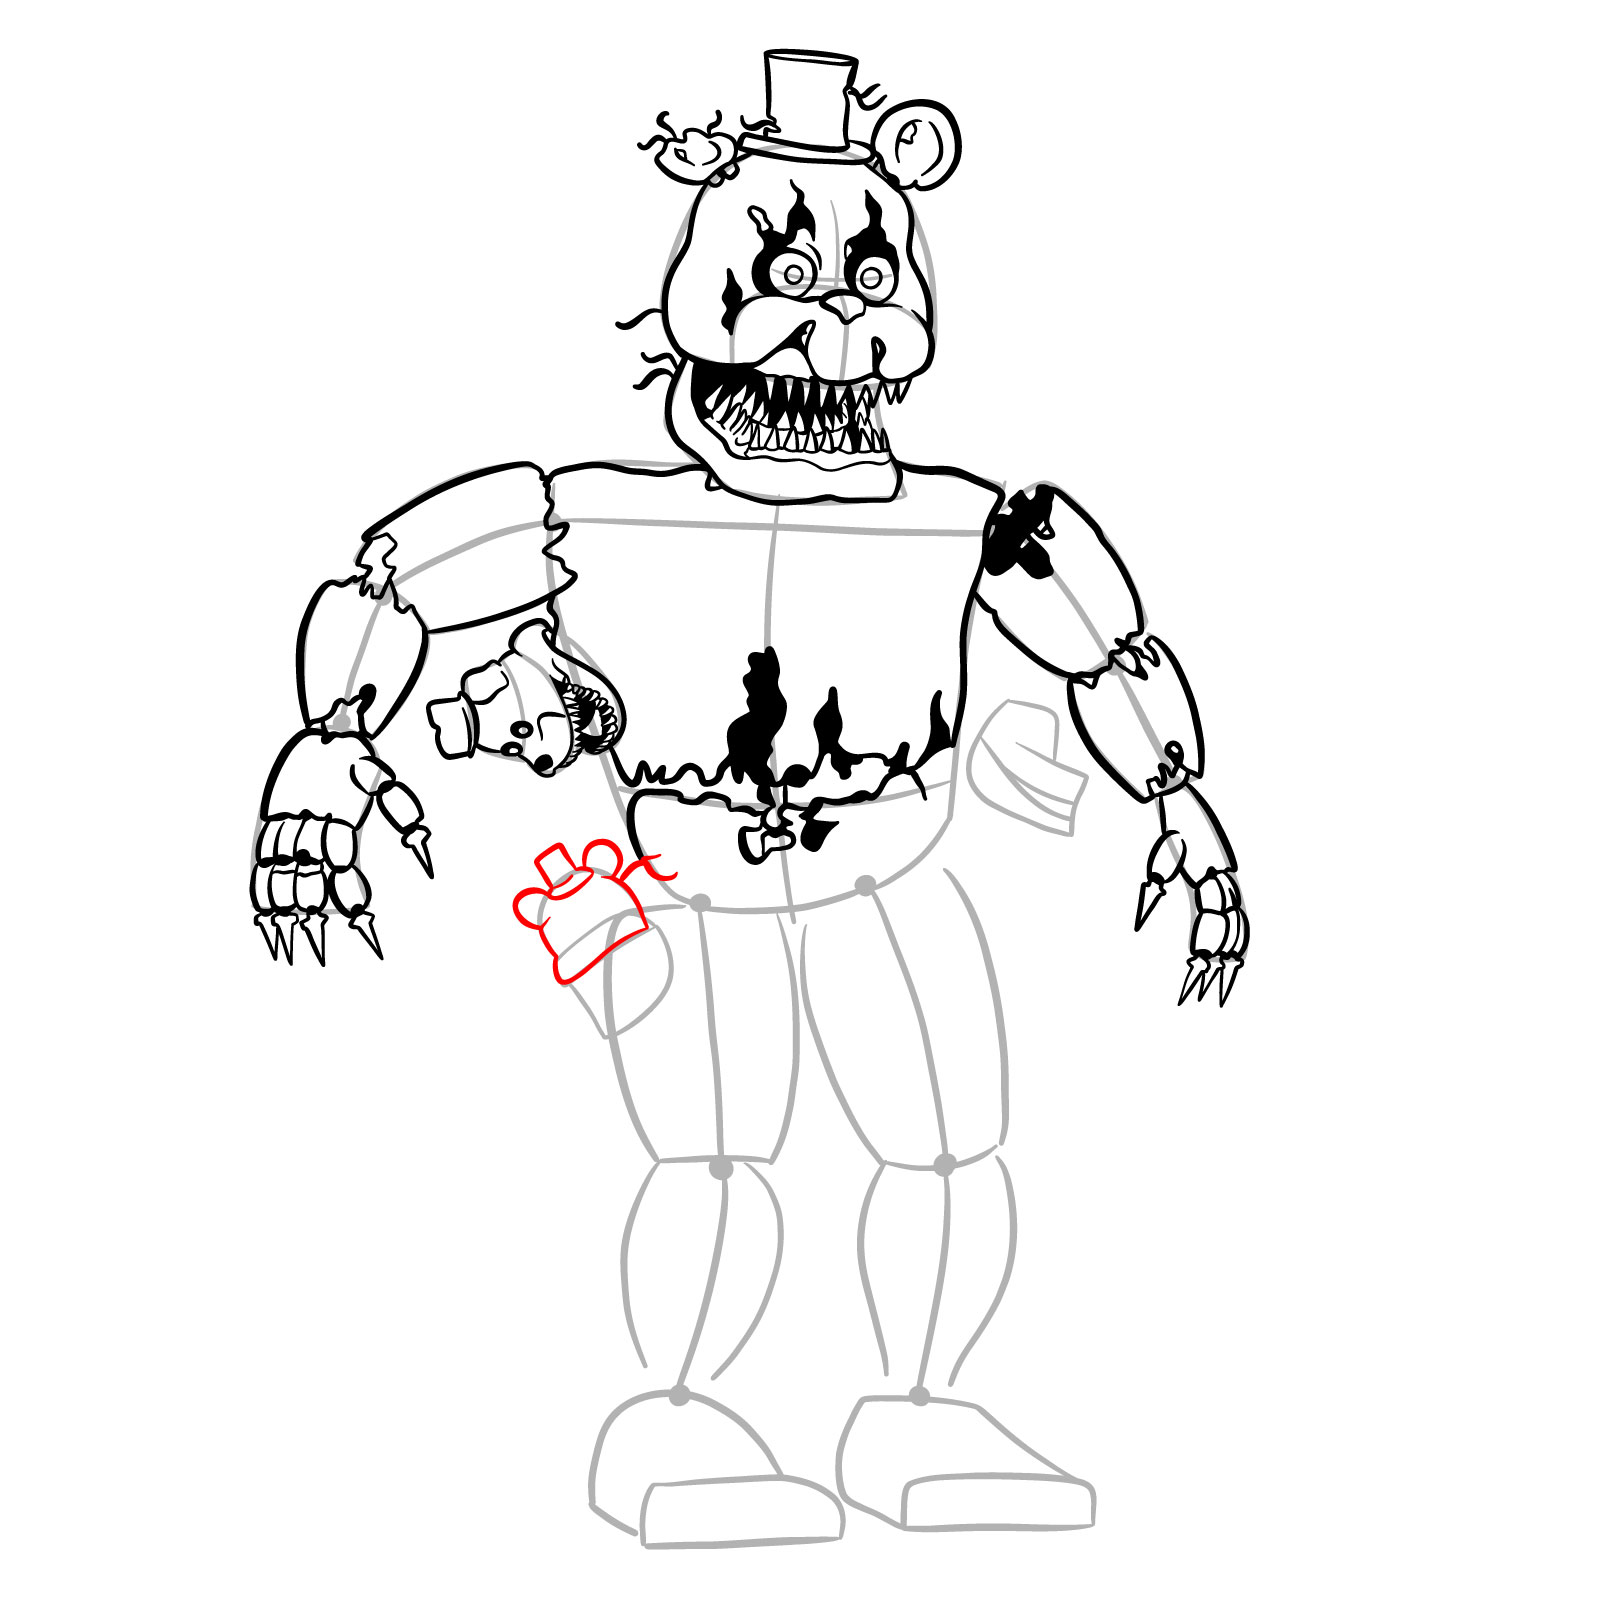 How to draw Nightmare Freddy - step 31